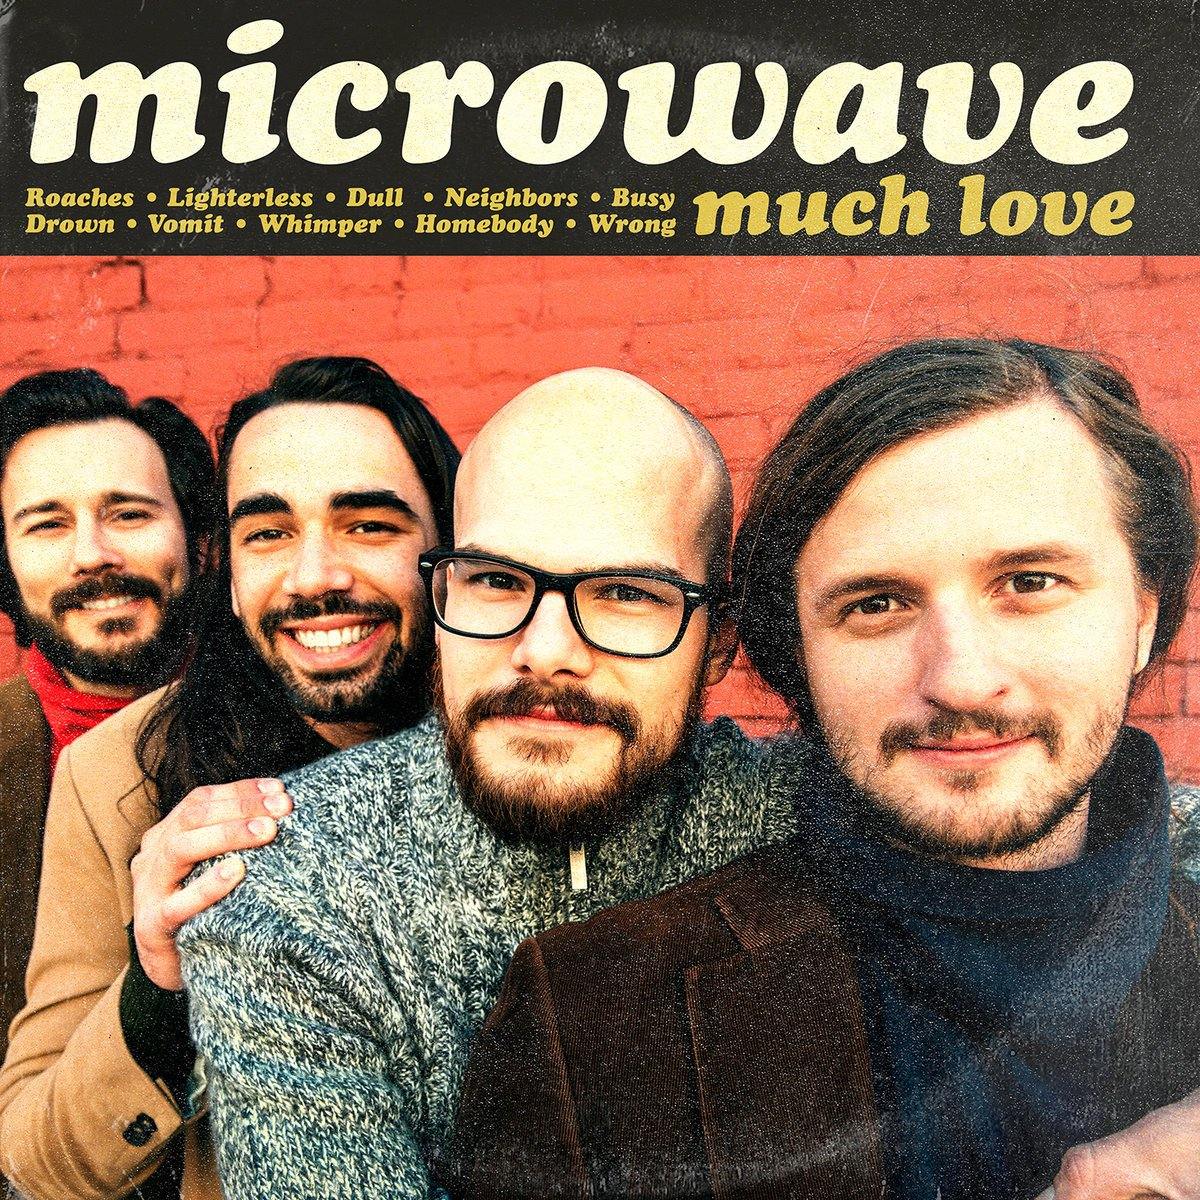 Buy – Microwave "Much Love" 12" – Band & Music Merch – Cold Cuts Merch